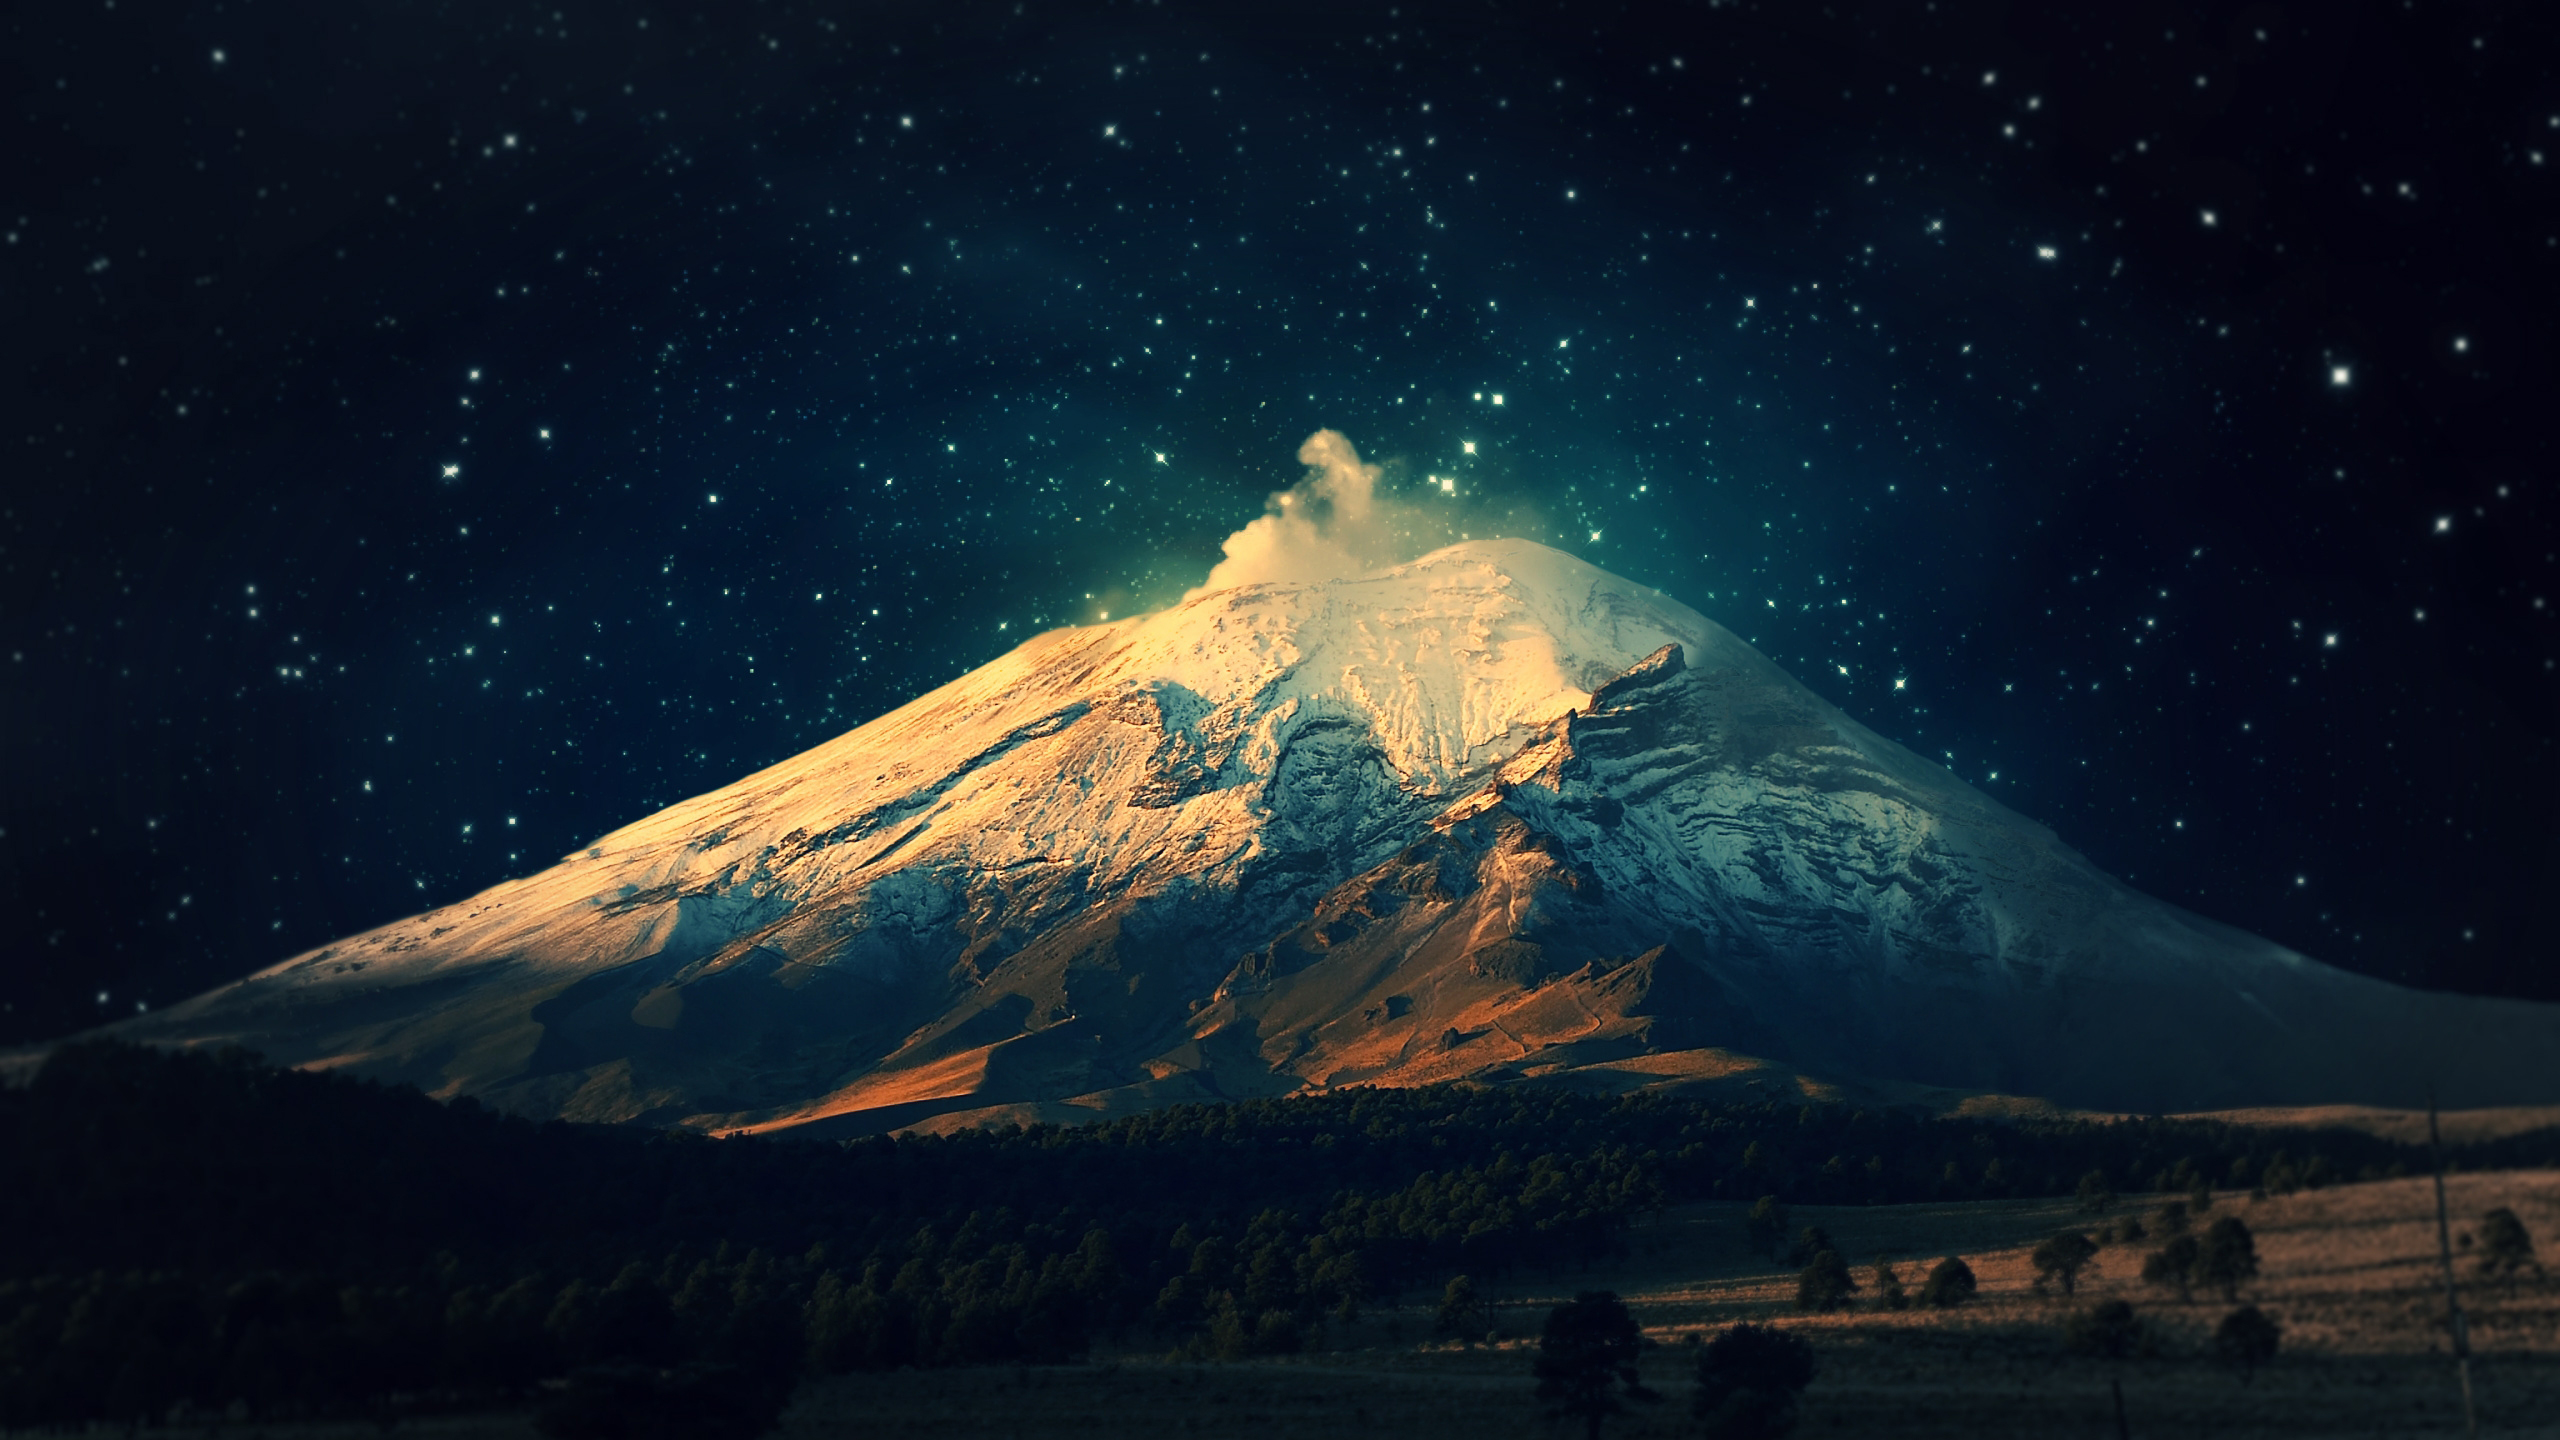 4K Starry Sky Above Snow Covered Mountains Wallpapers